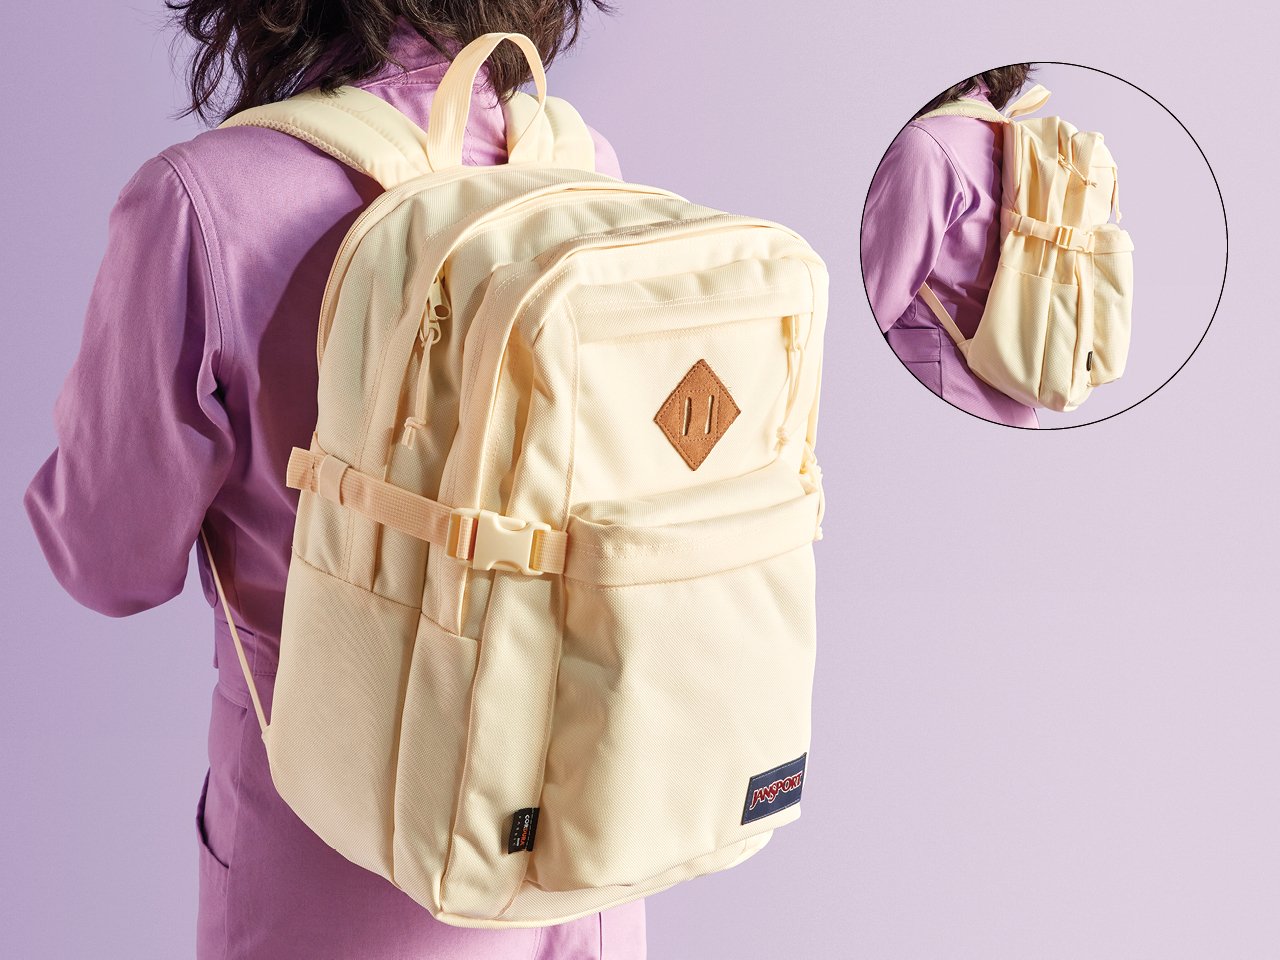 A photo of the back of a woman in a lilac jumpsuit wearing a cream backpack